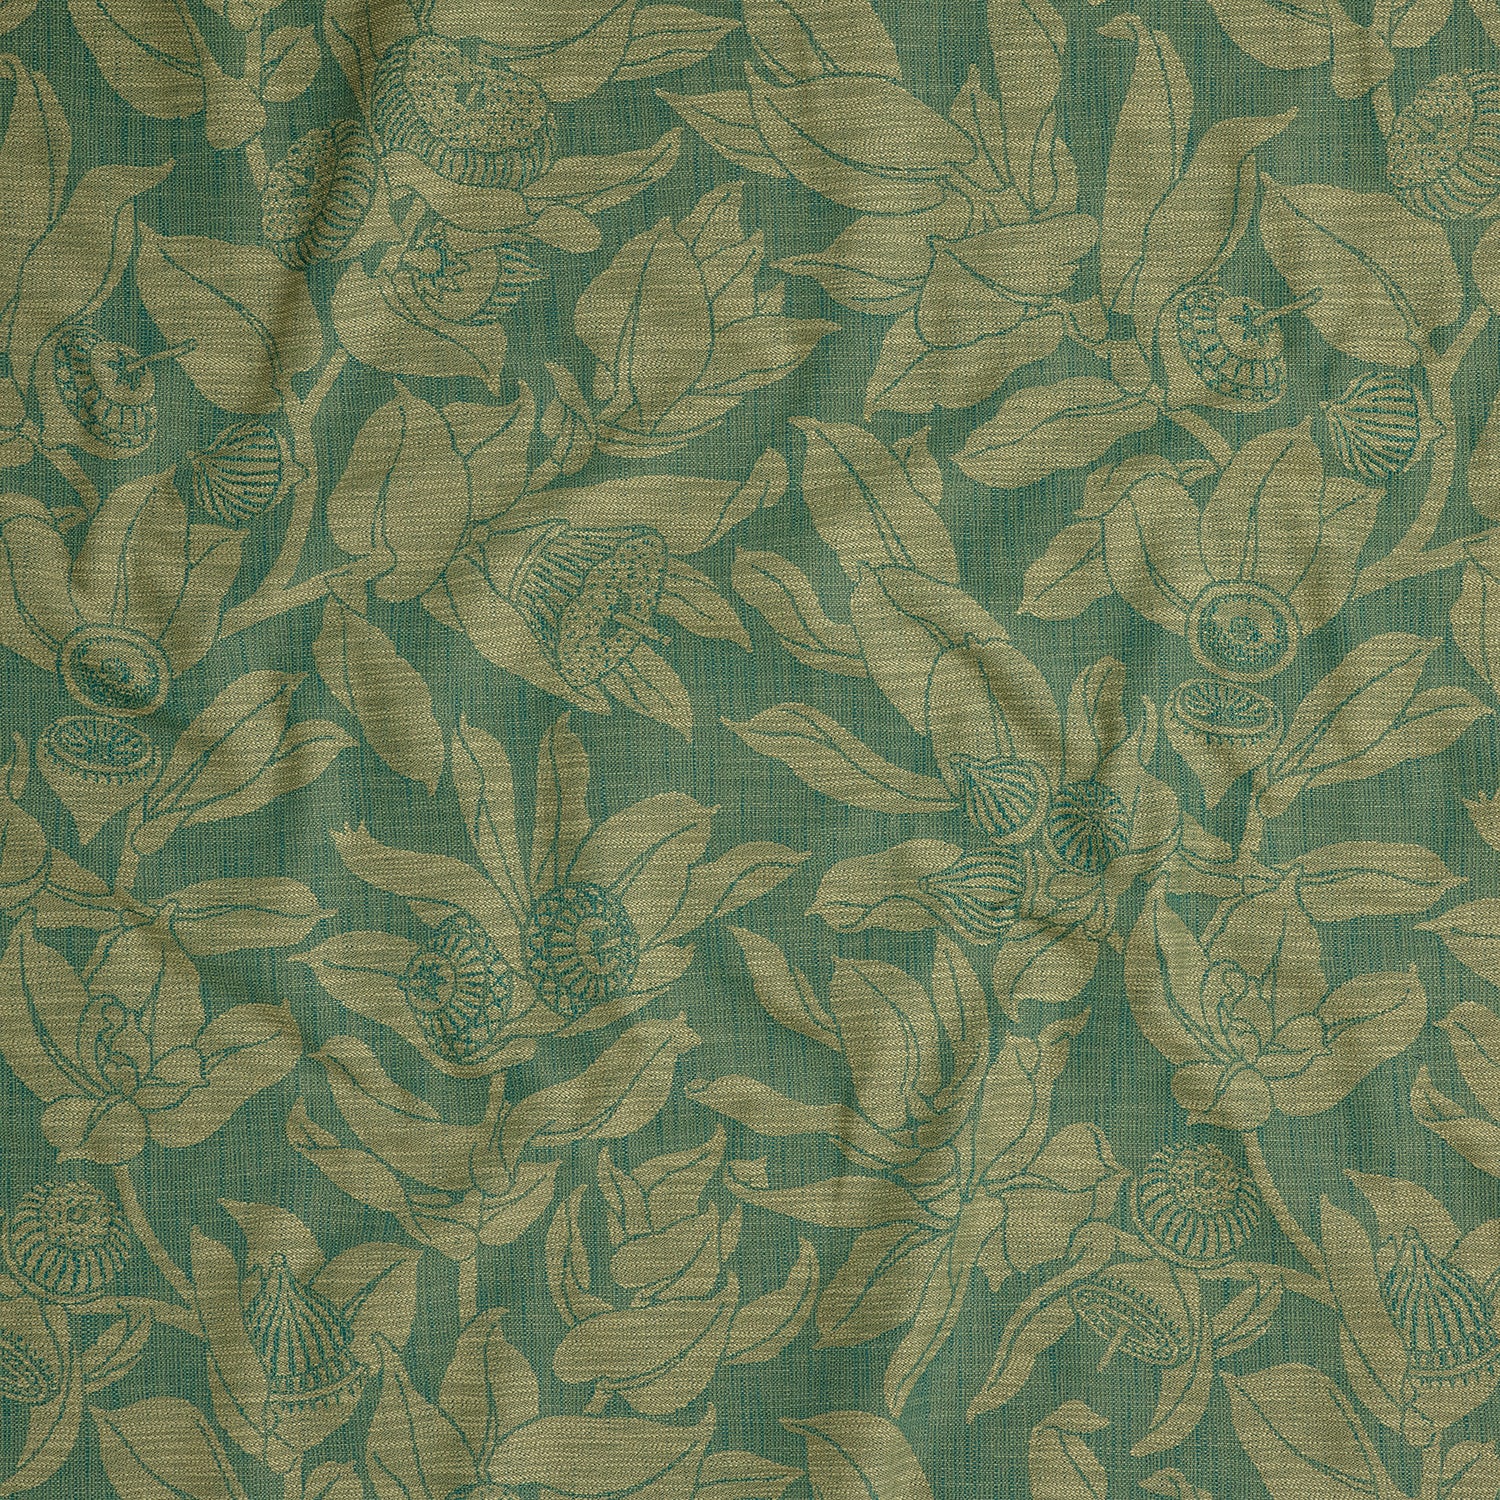 Draped fabric in a leaf and bud print in olive on a dark green field.